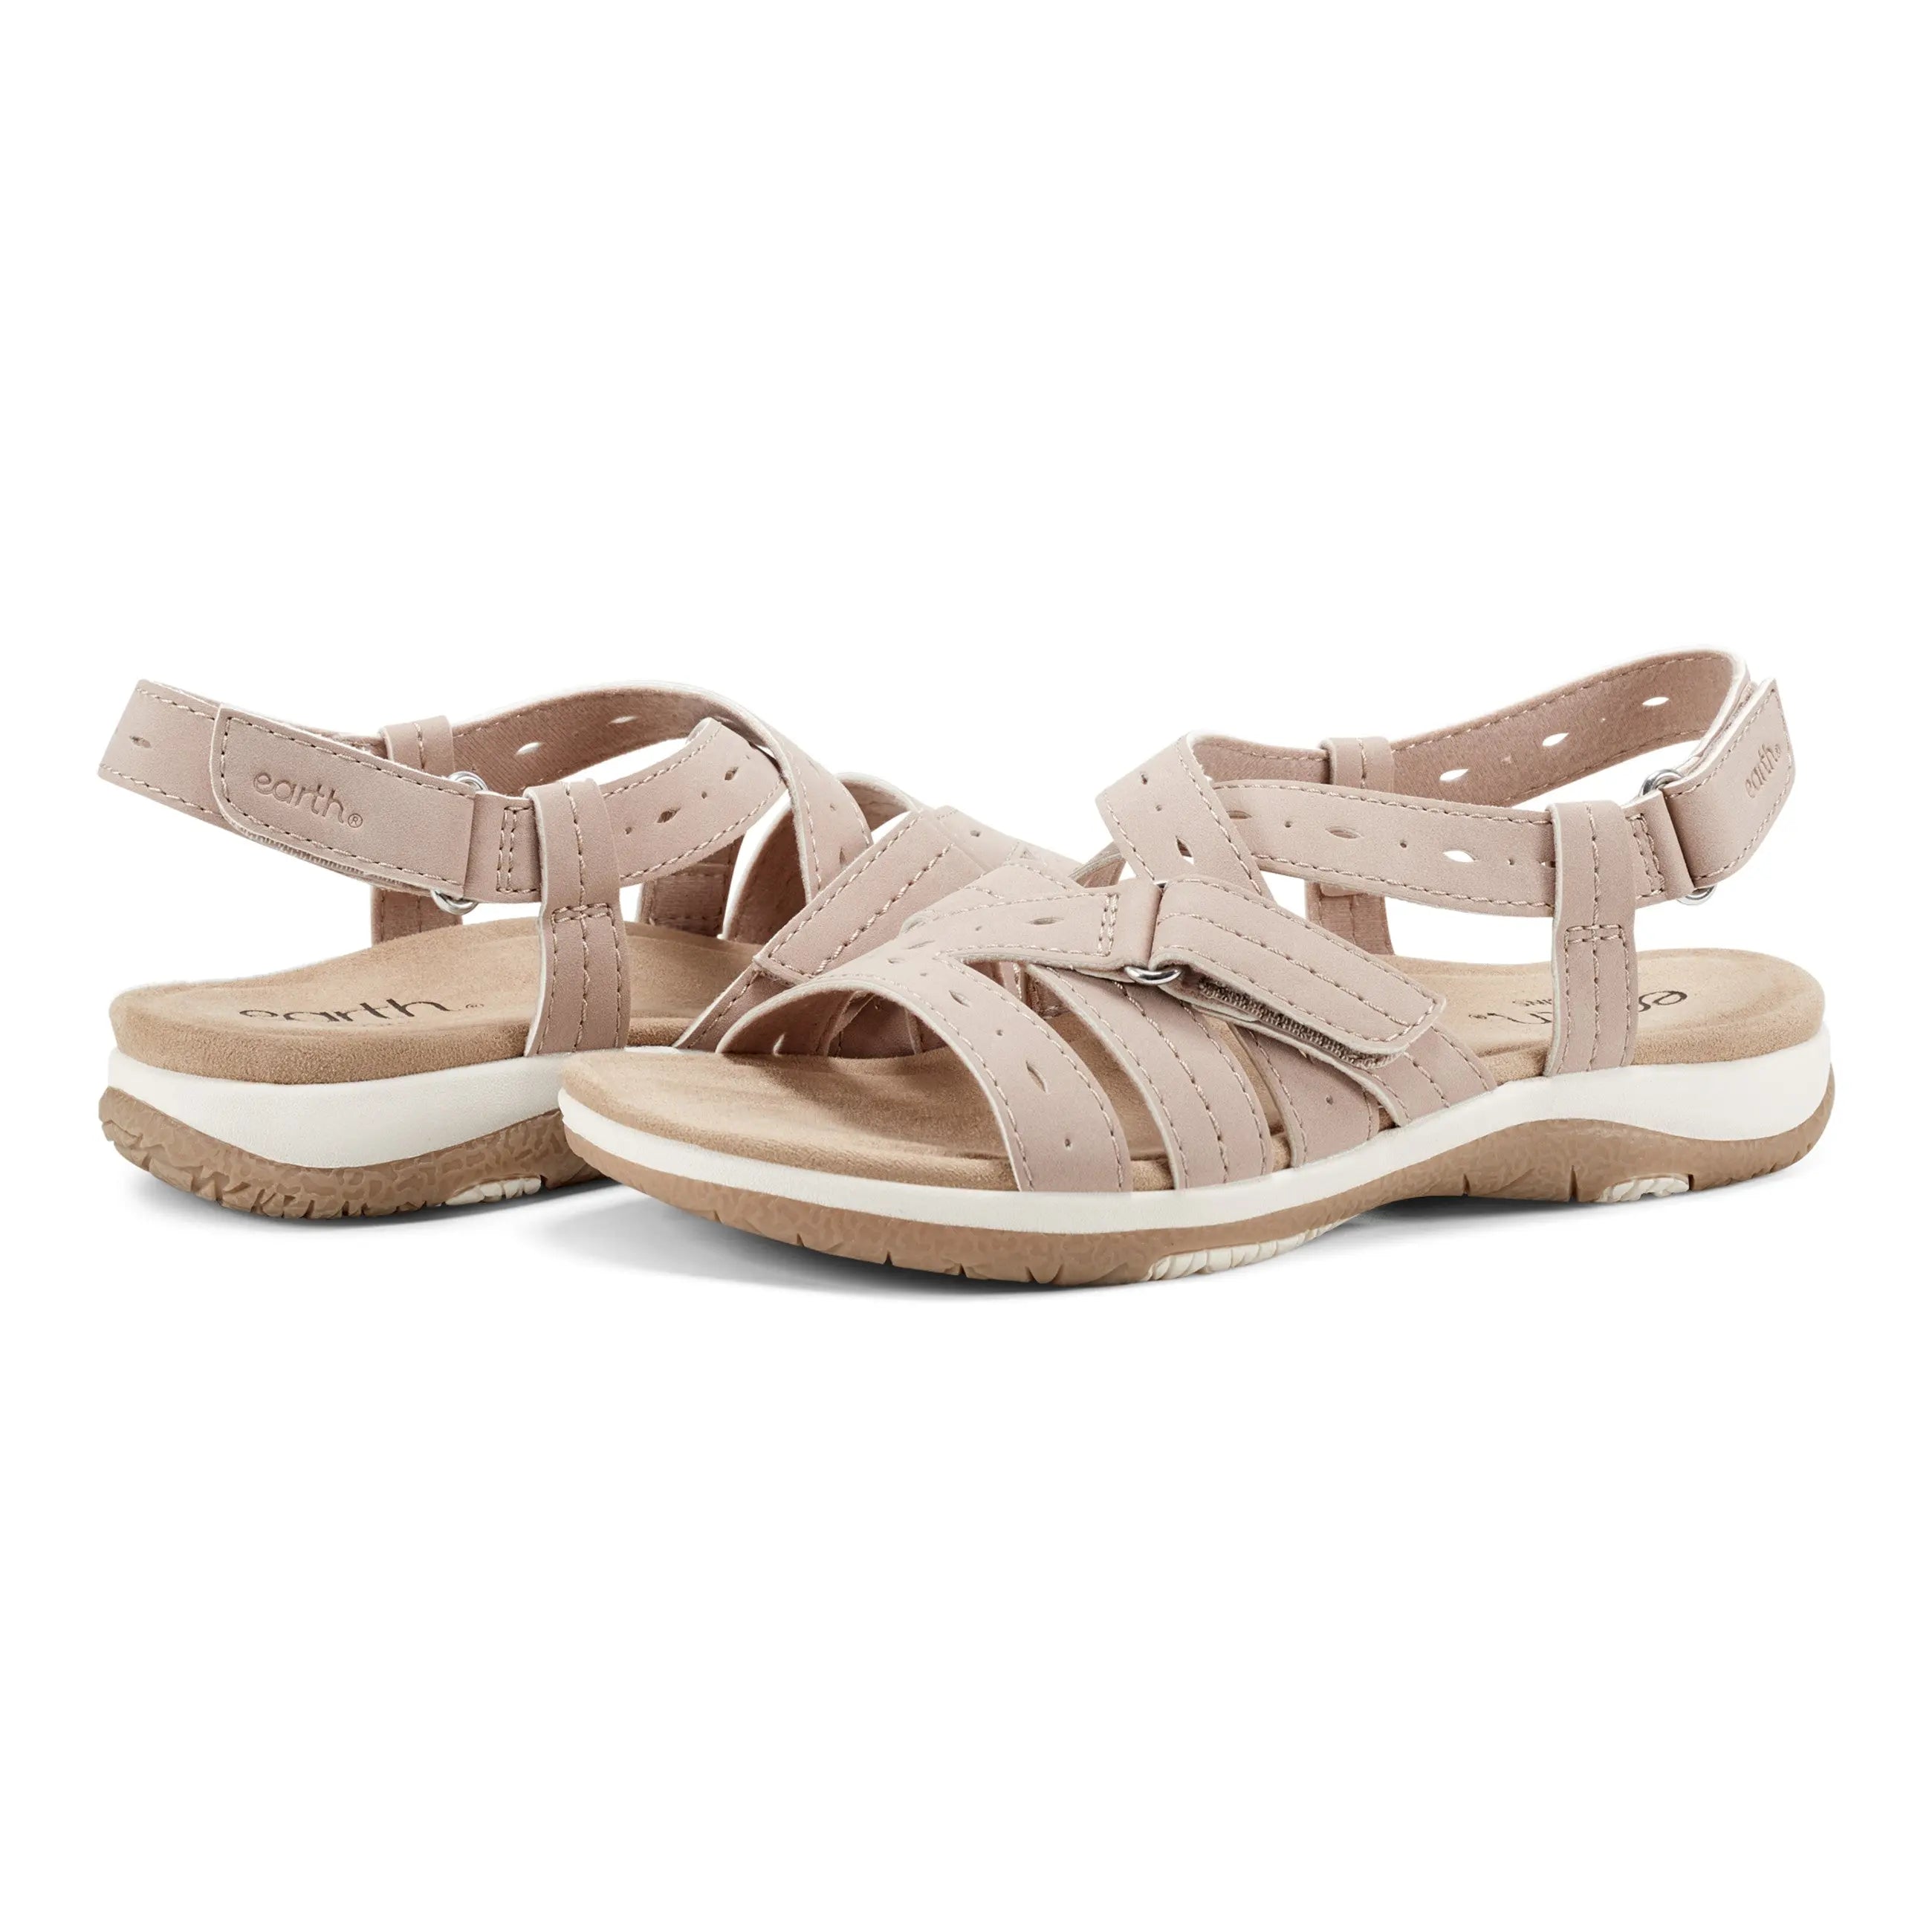 Samsin Round Toe Strappy Casual Flat Sandals